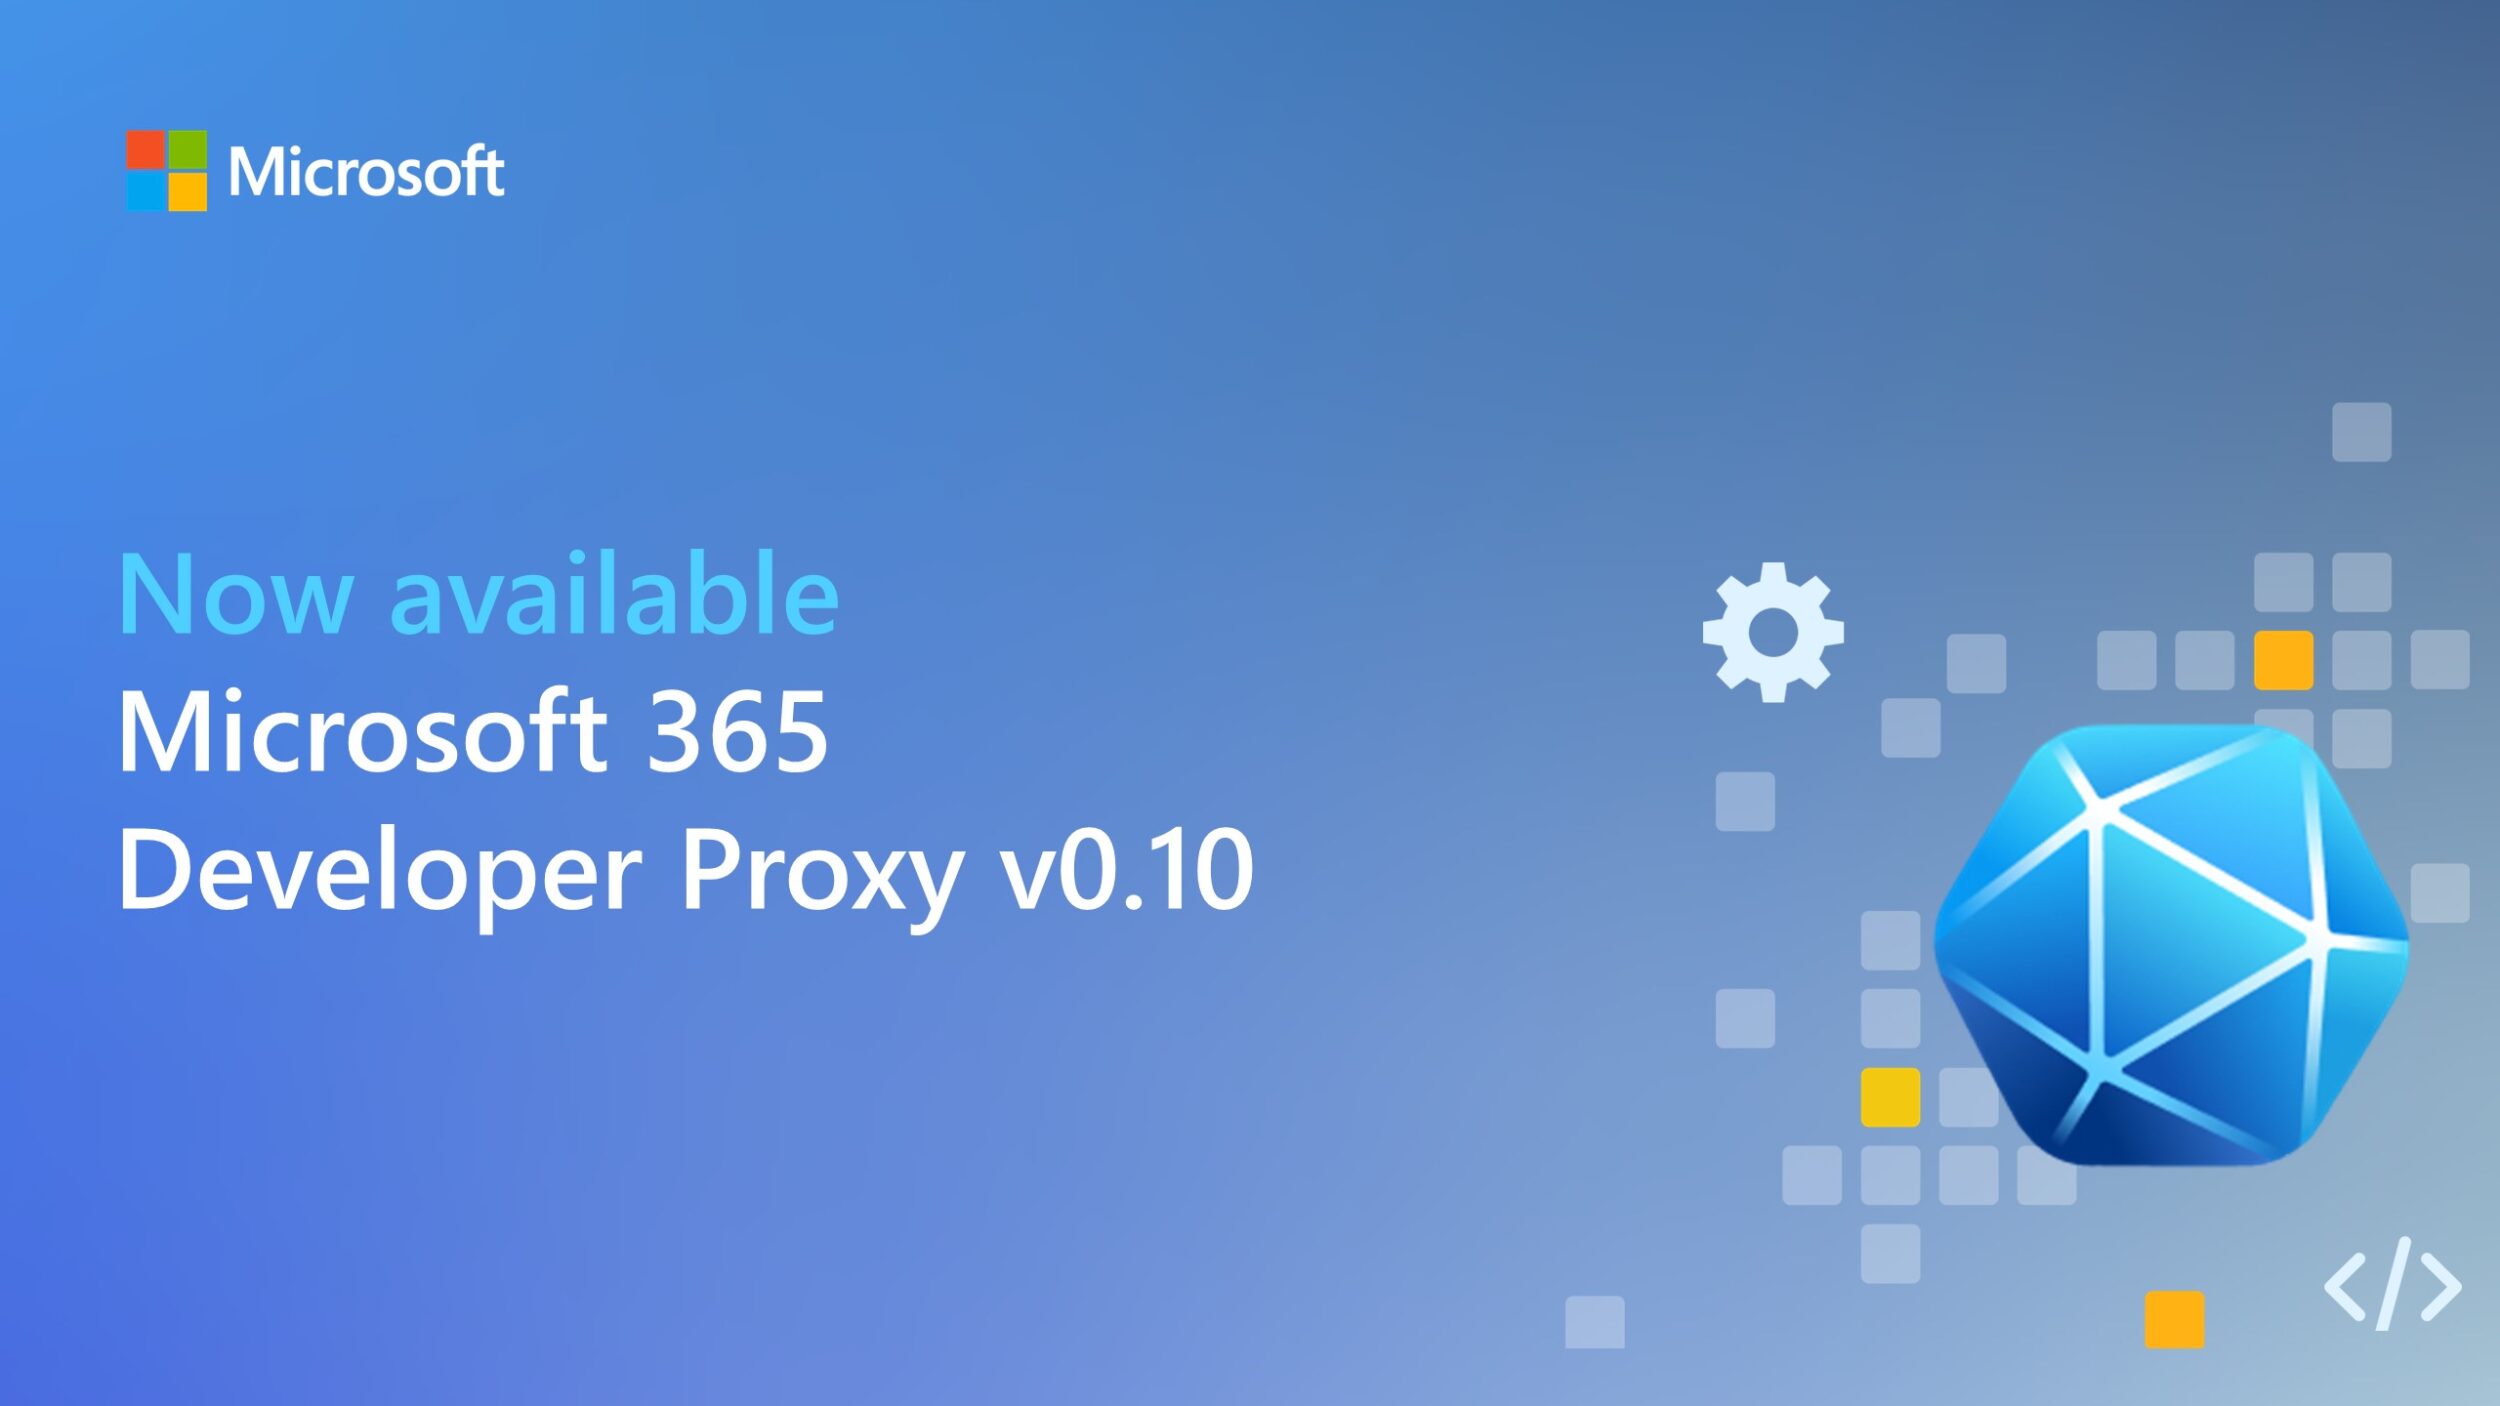 Microsoft 365 Developer Proxy v0.10 with support for batching and improved $select guidance